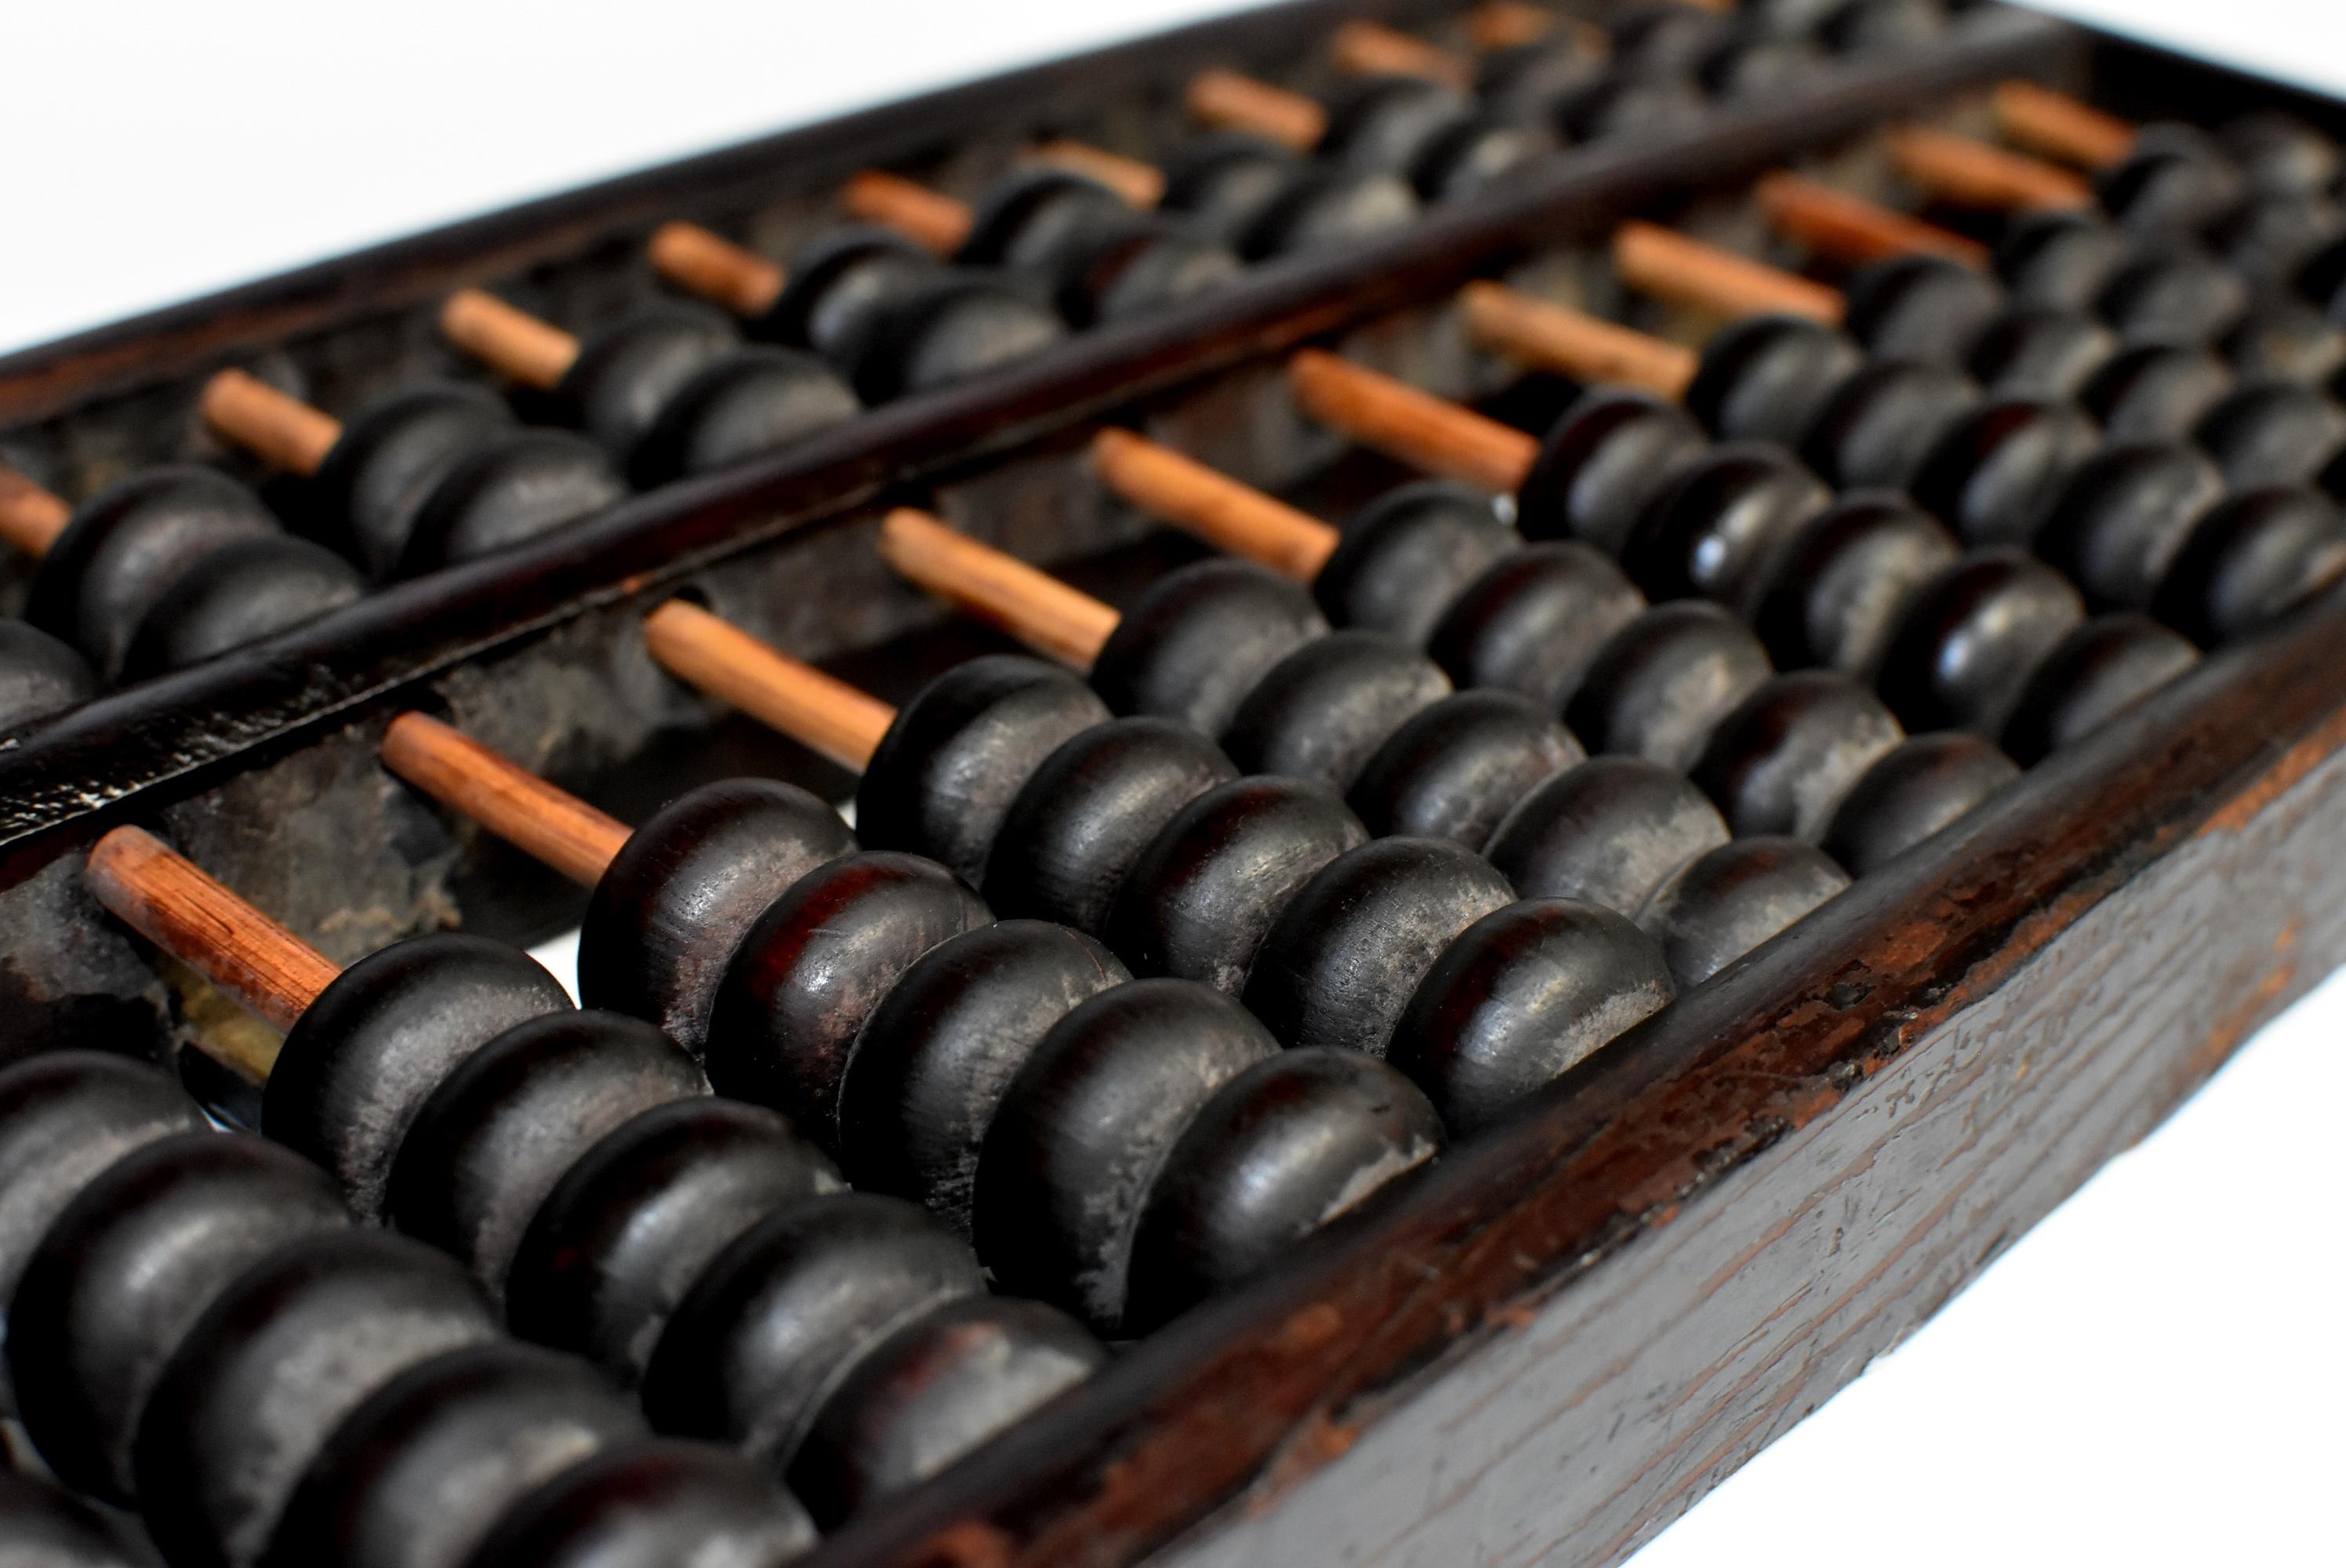 This is an authentic Chinese abacus that was used in the 20th century. The Abacus being an ingenious calculator has been used in China for over a thousand years. Its accuracy and speed remains extraordinary till this day of age. This particular